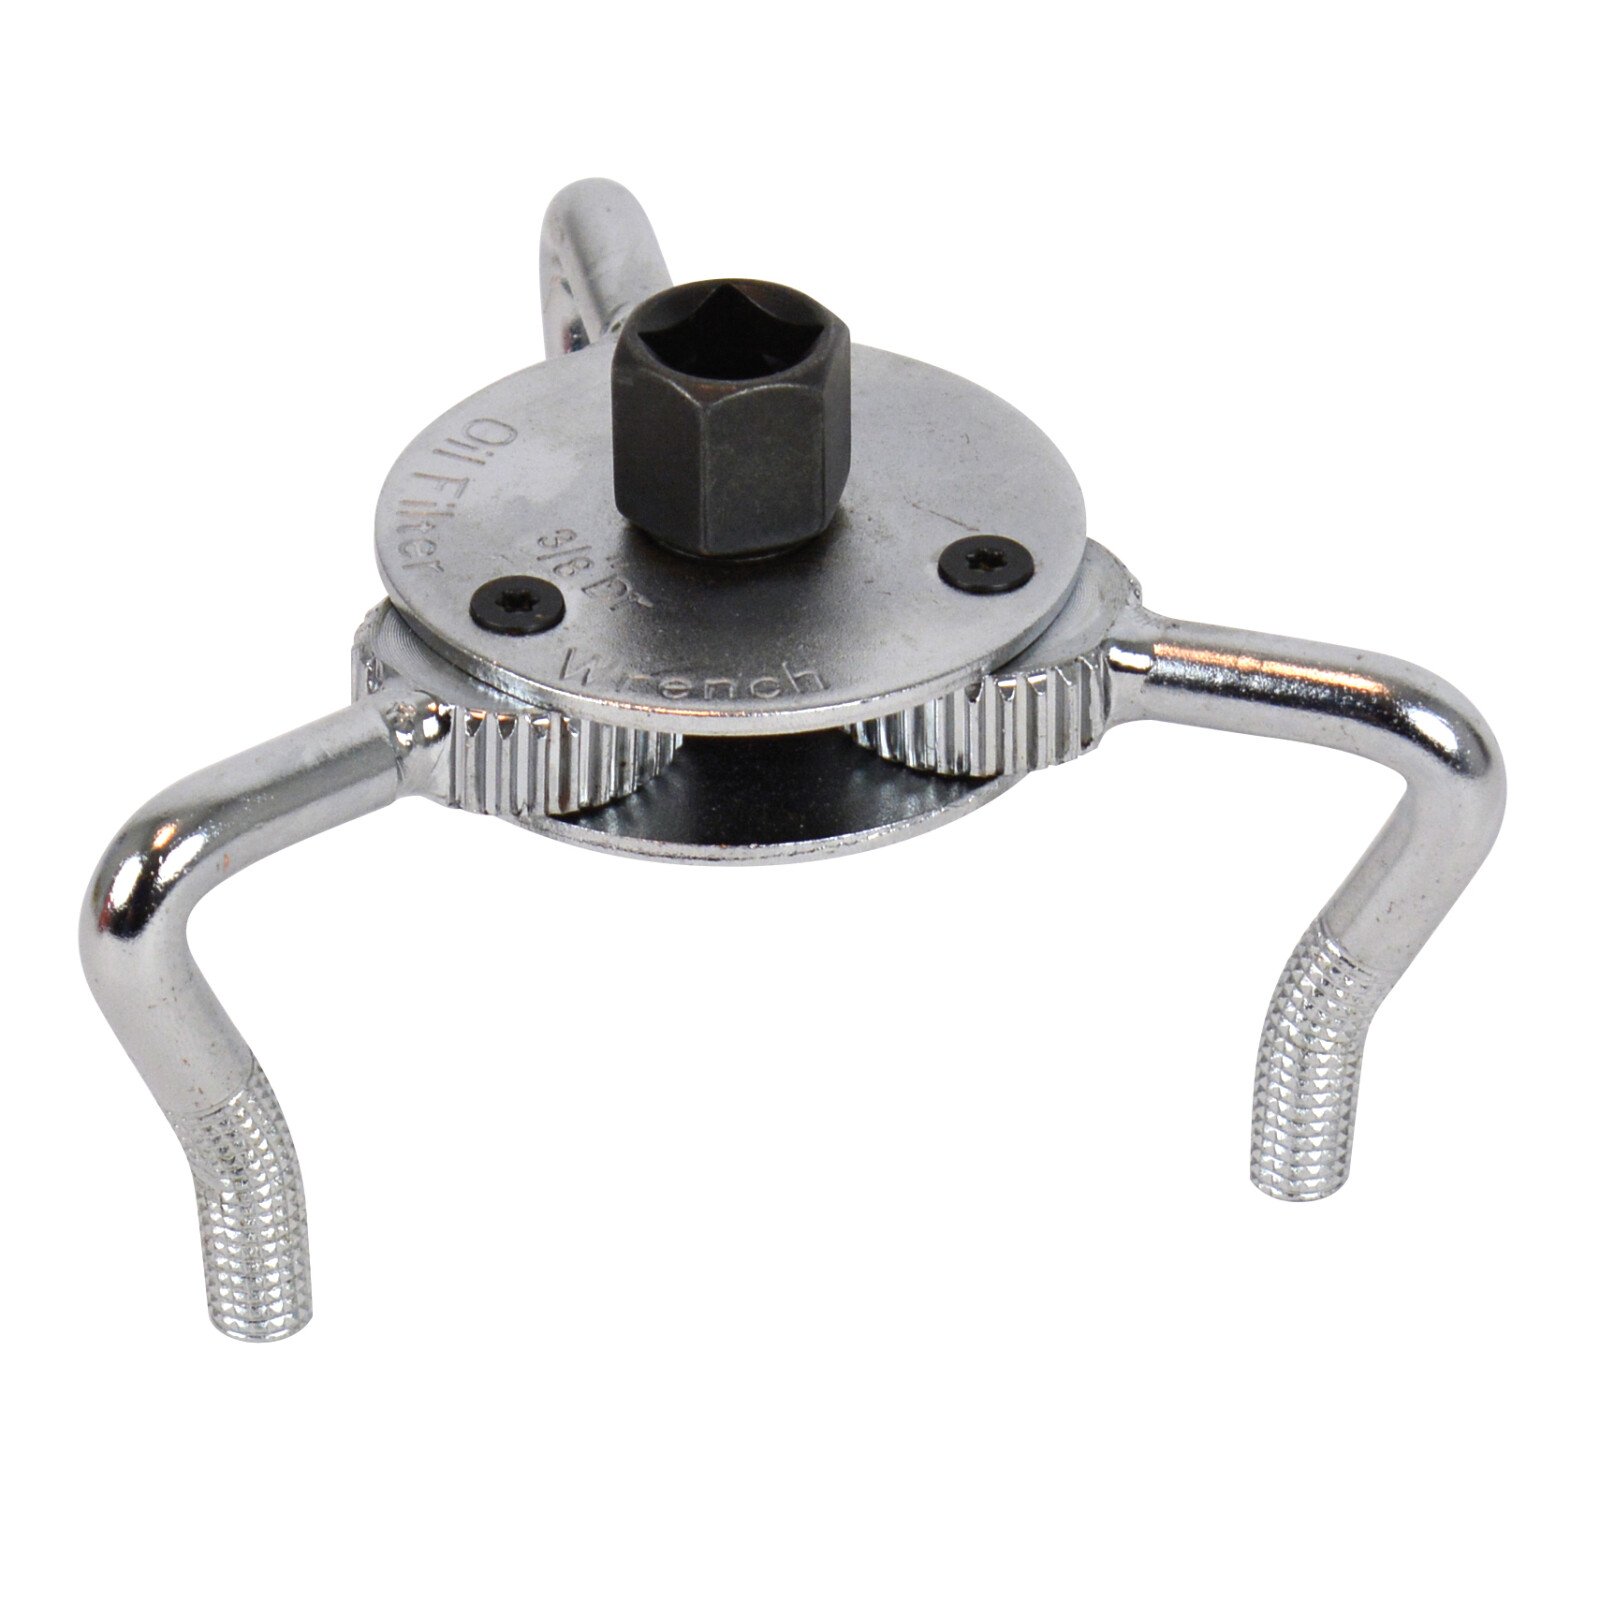 Carpoint Professional 3 jaw oil filter wrench thumb